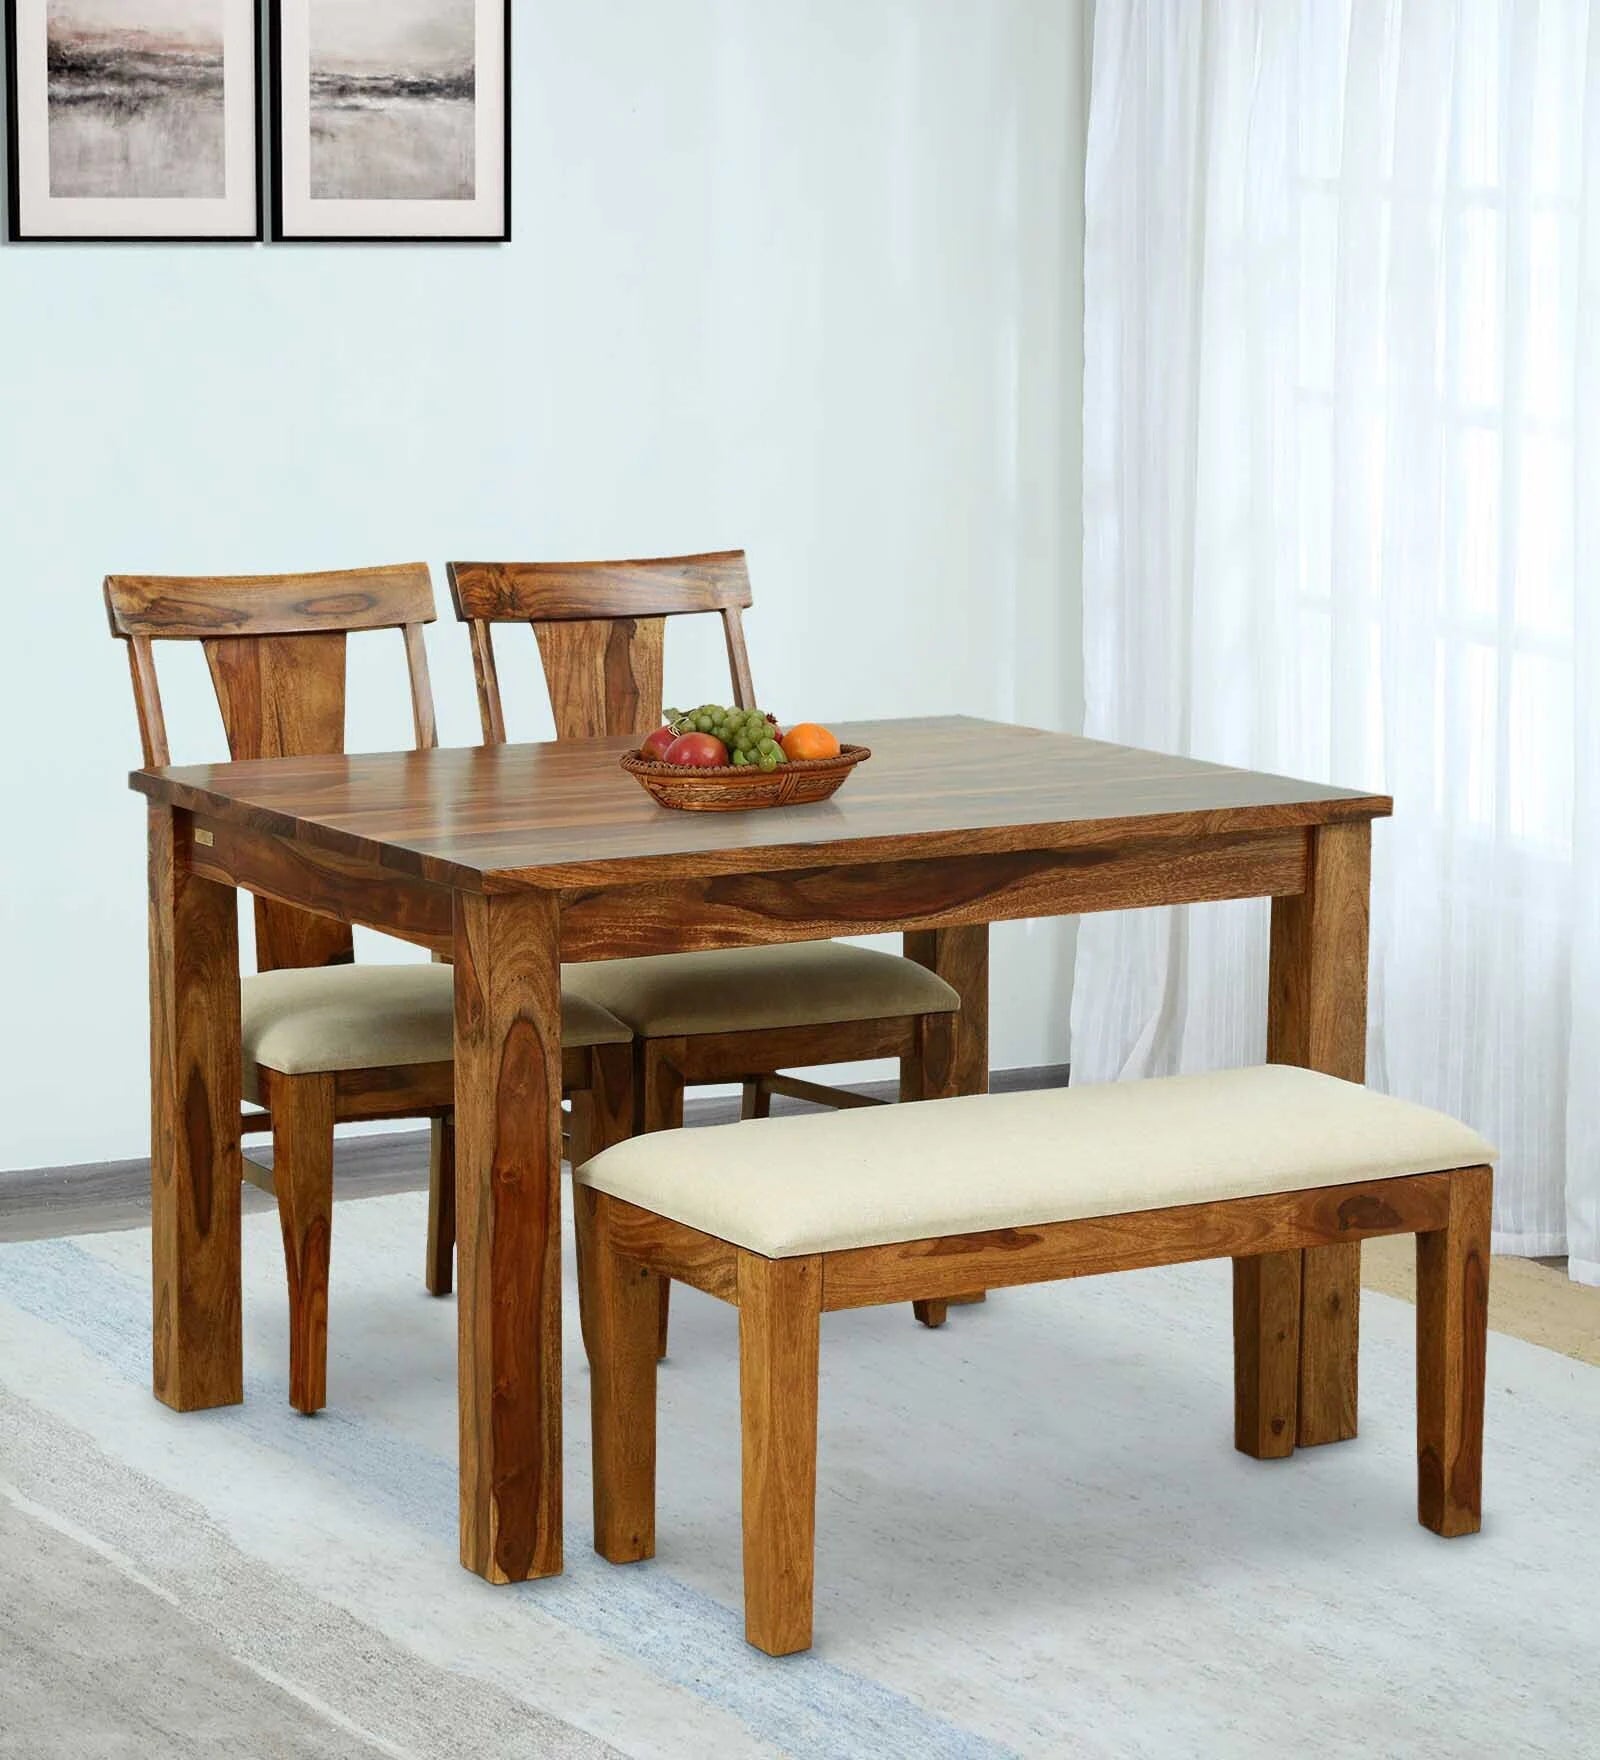 Sheesham Wood 4 Seater Dining Set In Rustic Teak Finish With Bench